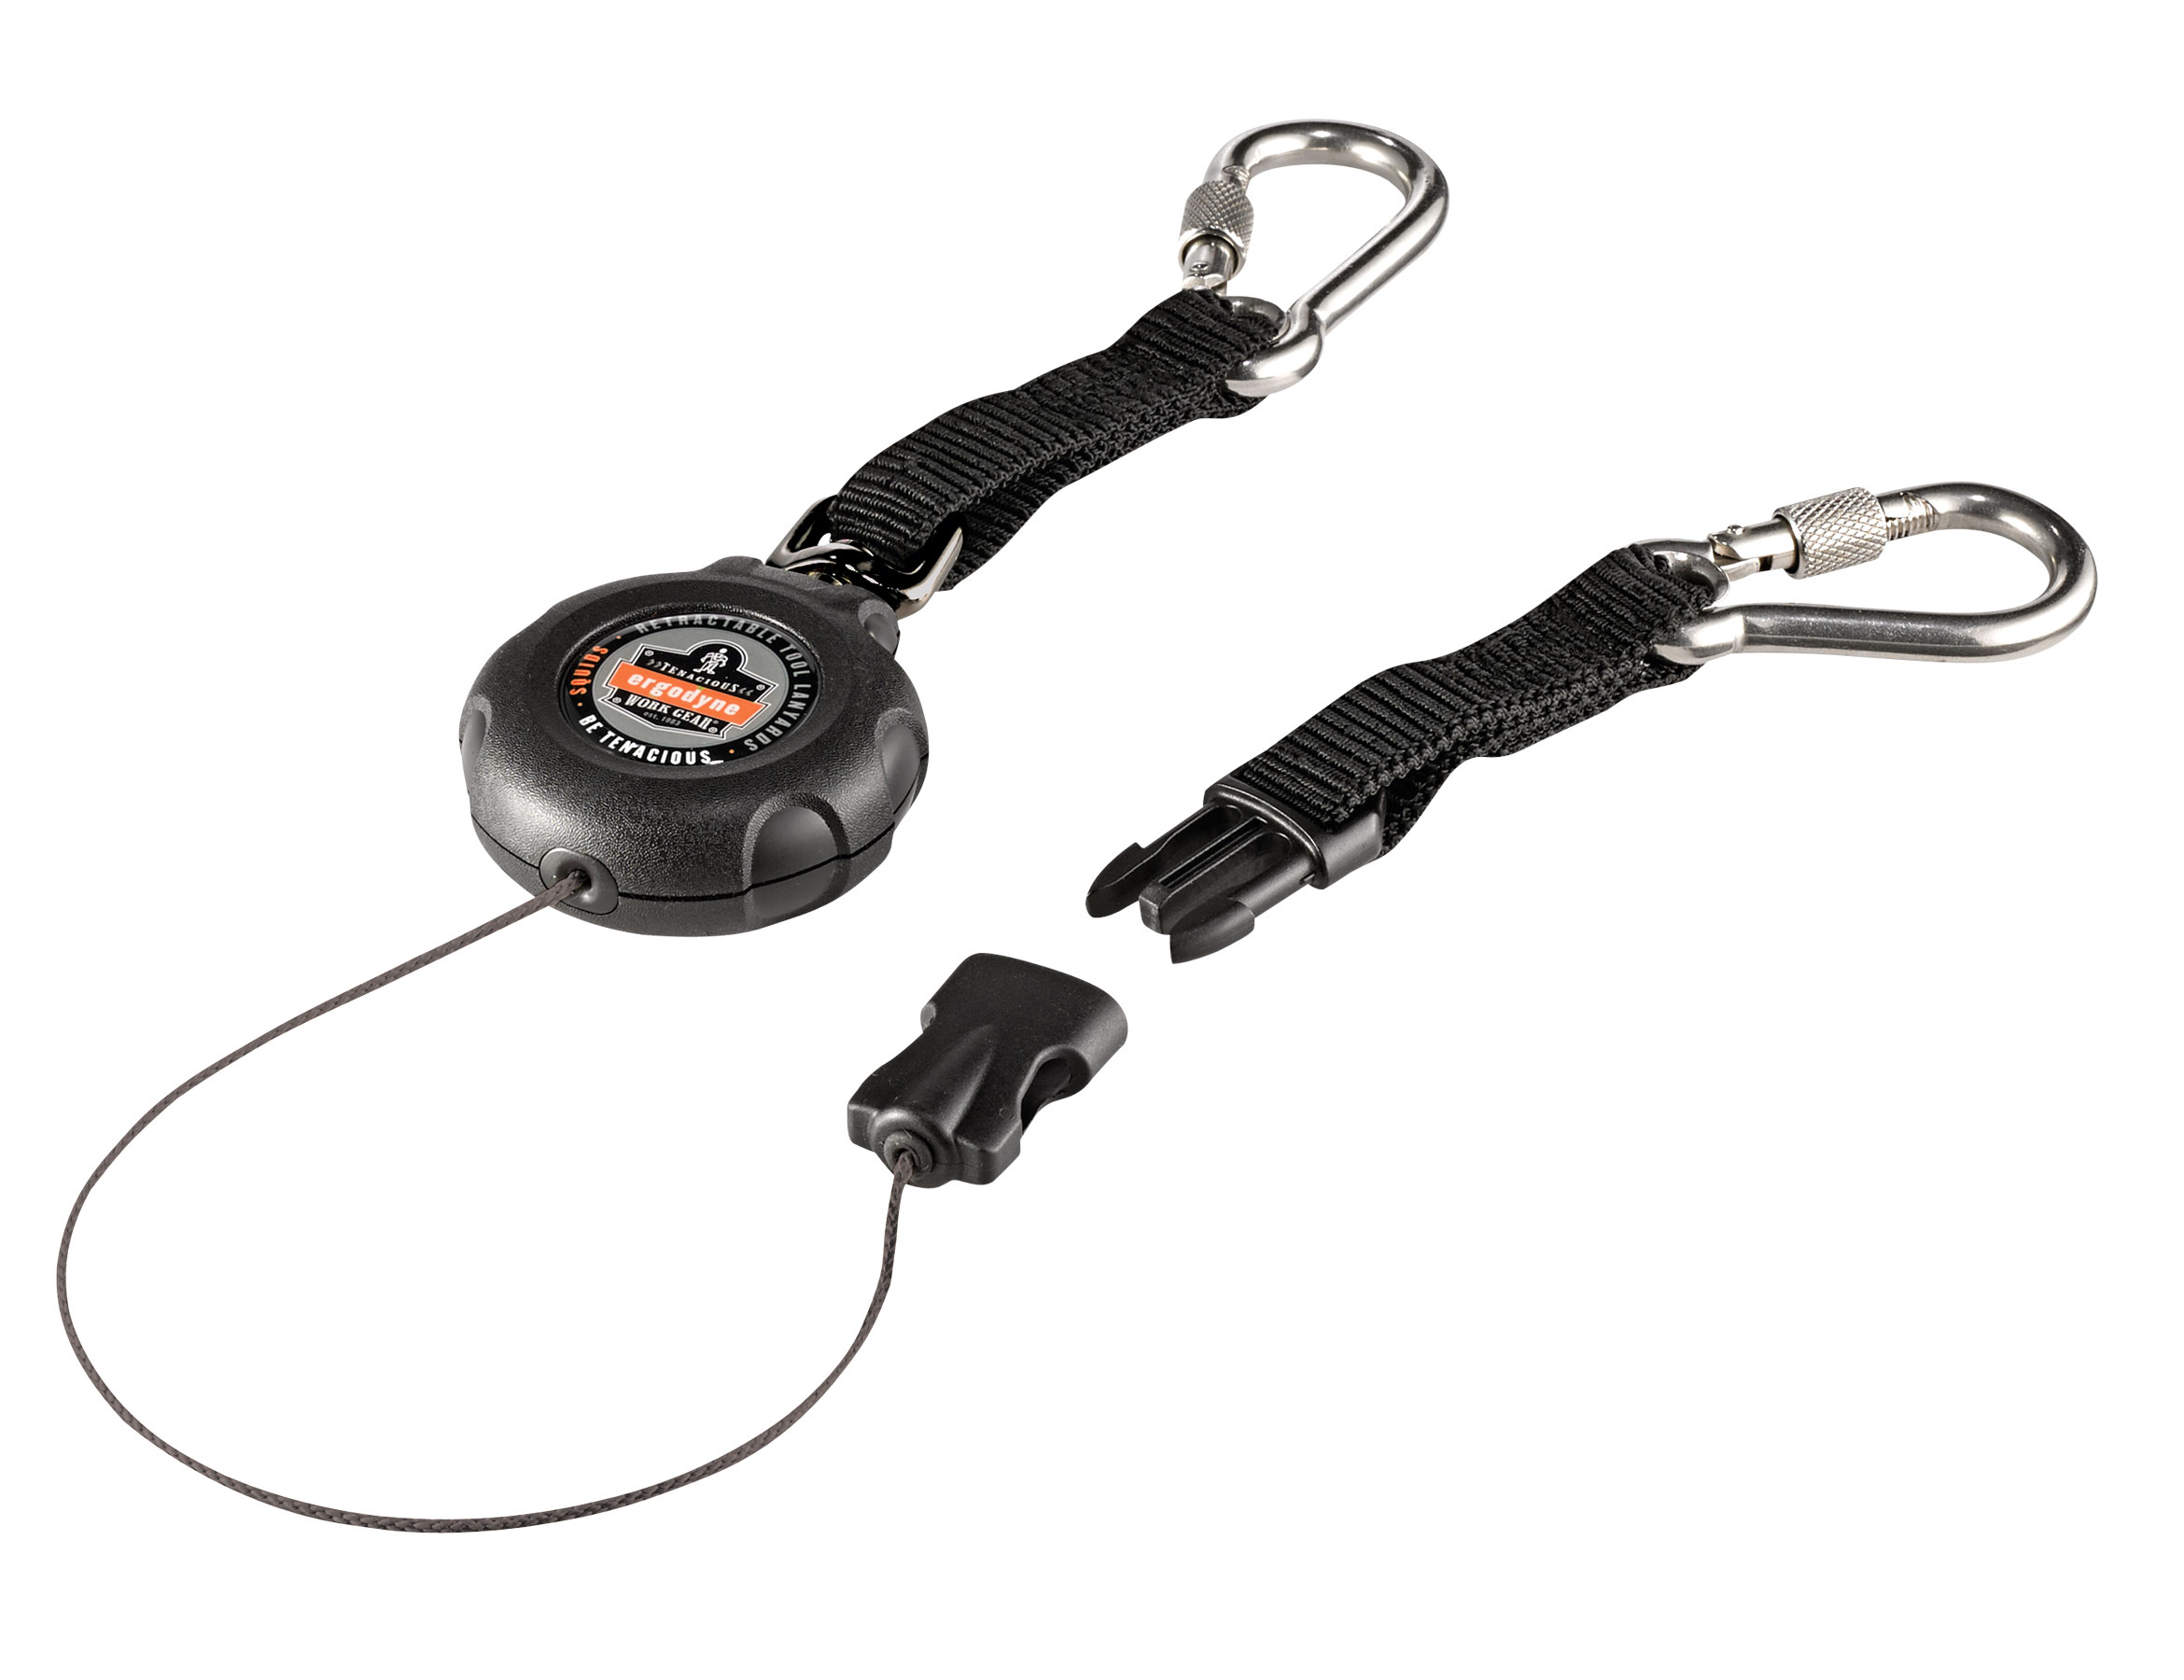 Ergodyne Squids 3000 Retractable Dual Stainless Steel Carabiner Tool Lanyard from Columbia Safety